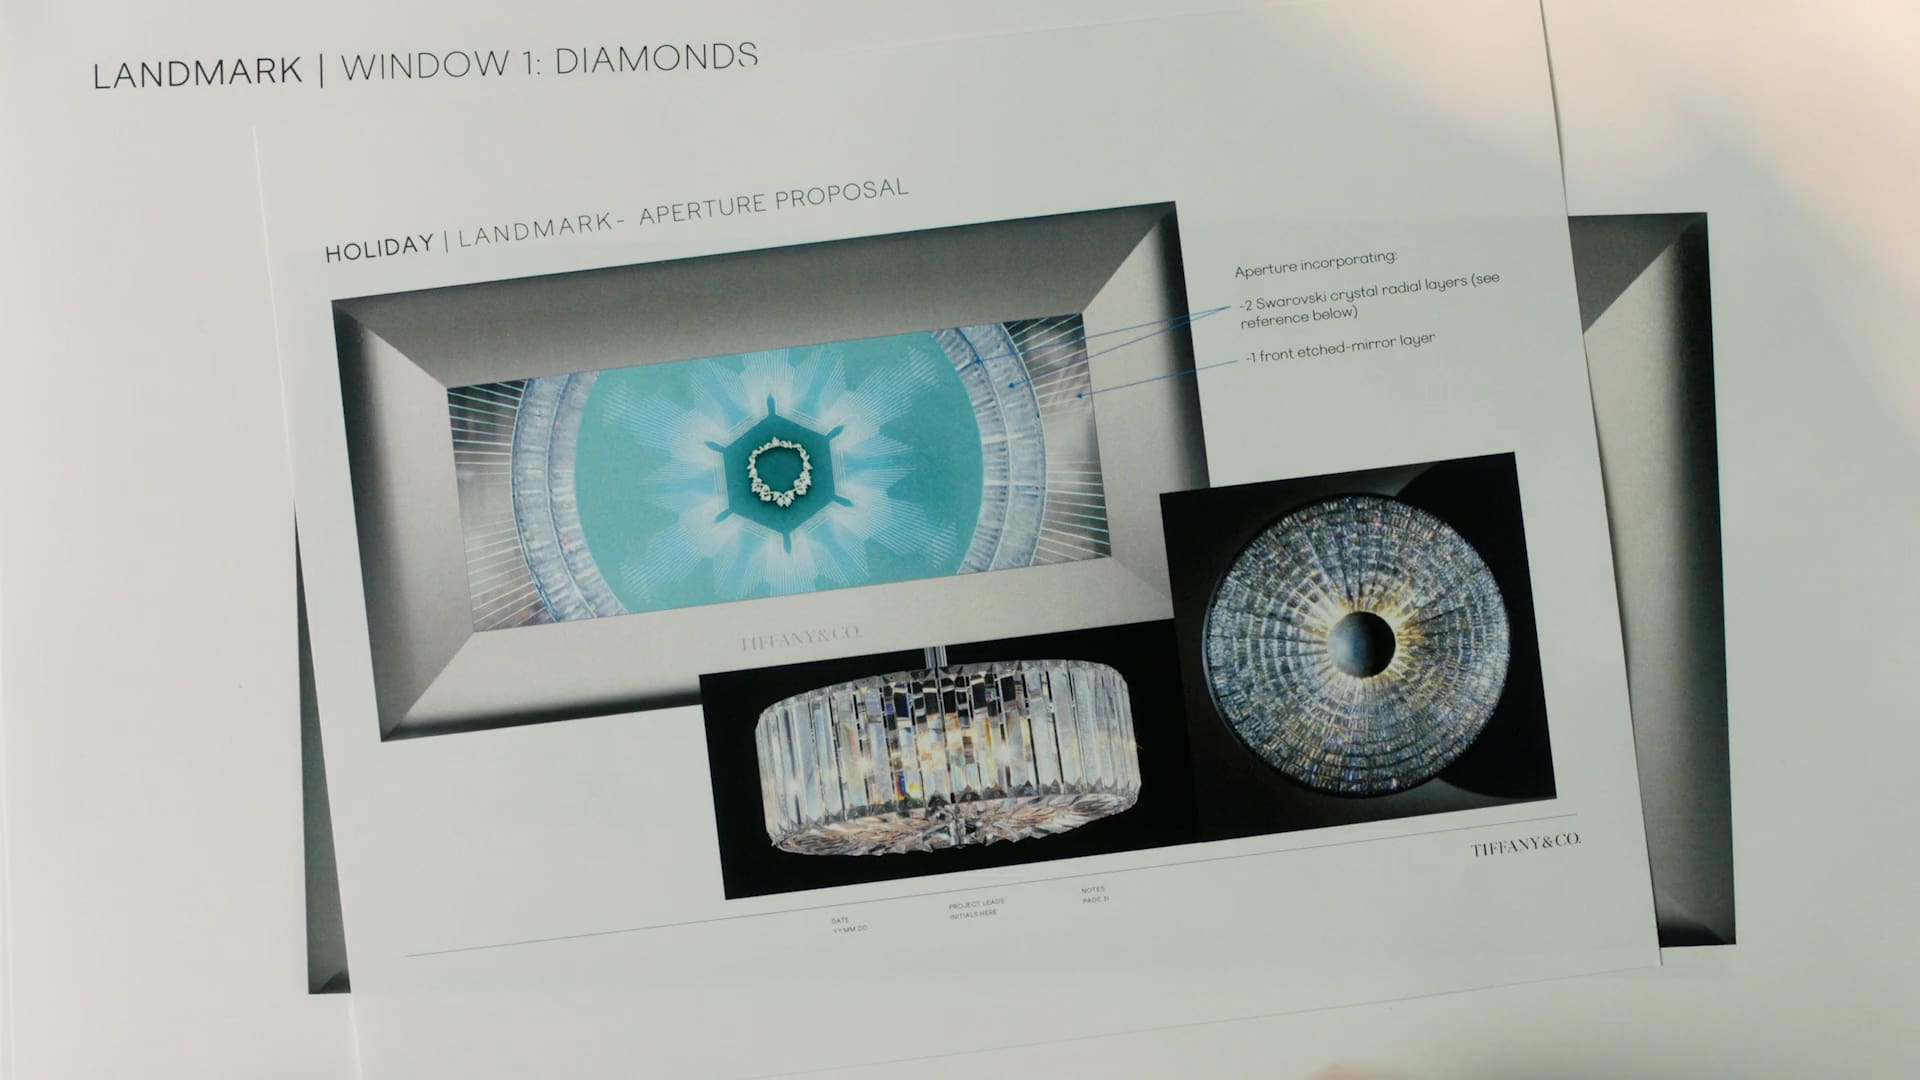 Design proposal for Tiffany's 2023 Holiday Window featuring a diamond aperture with Swarovski crystal layers and an etched-mirror detail.